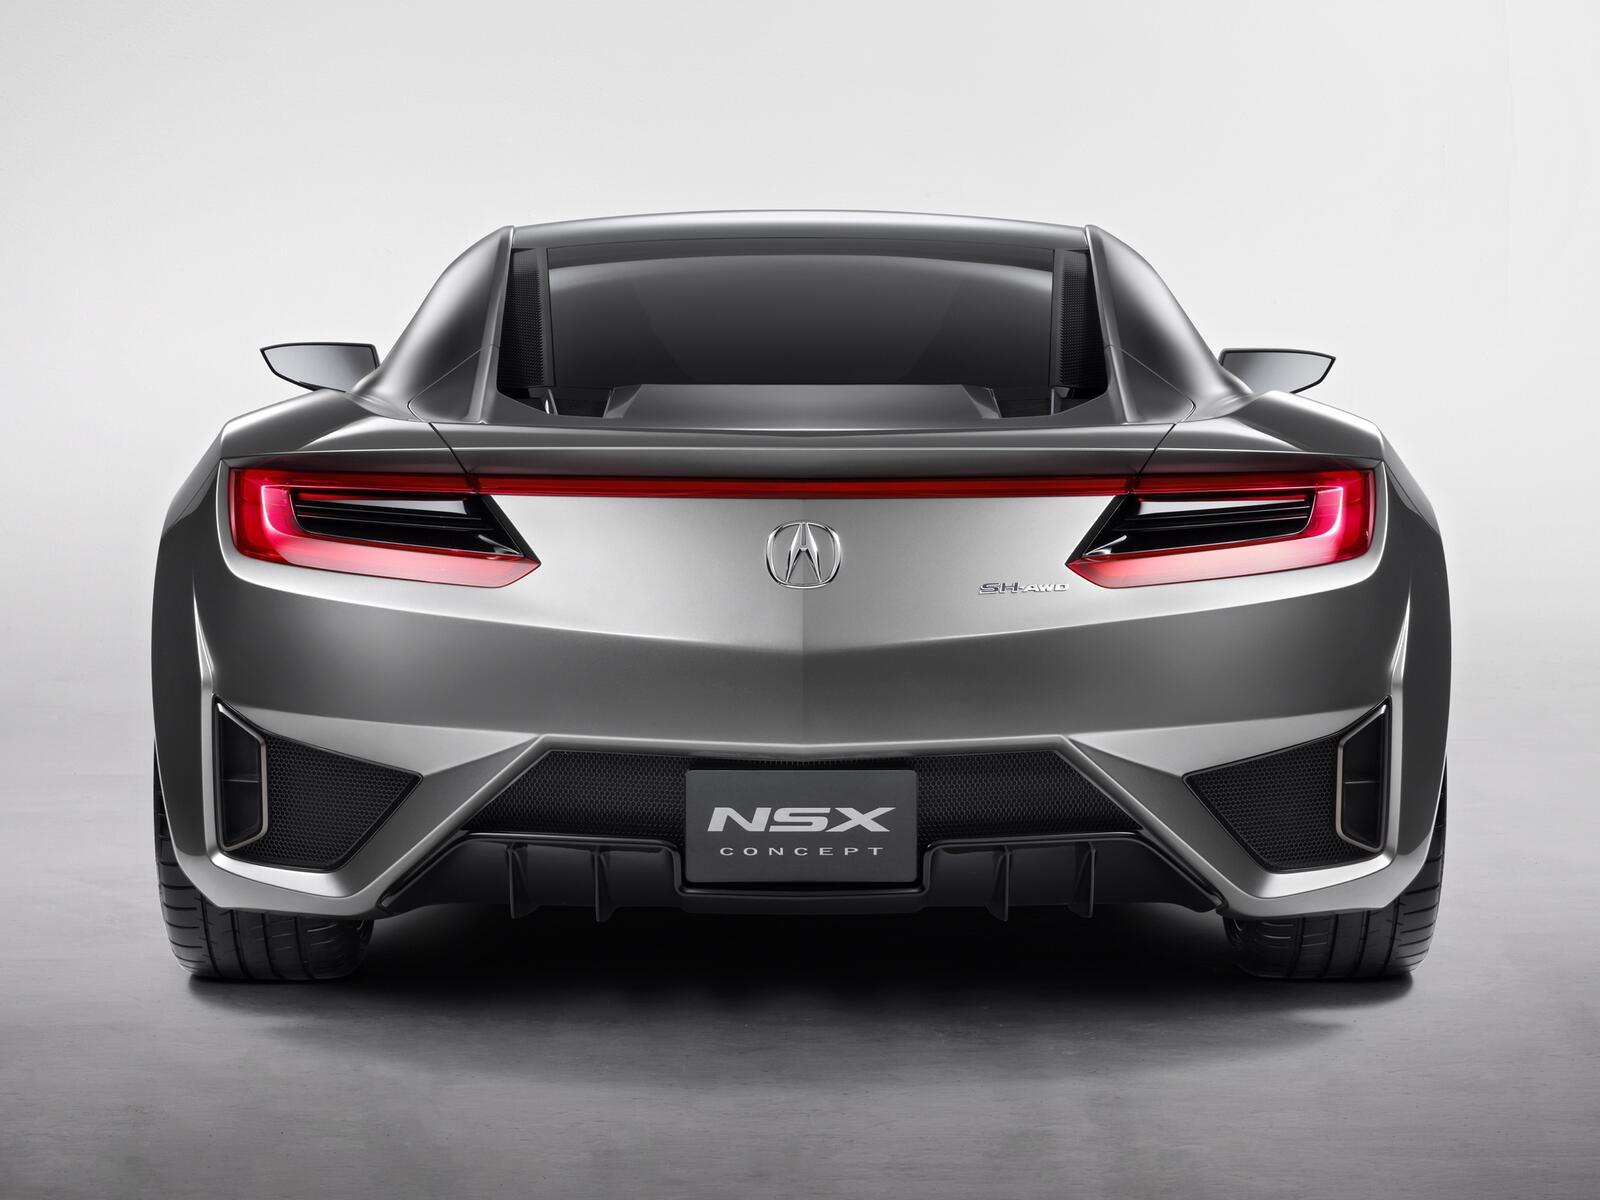 Wallpapers Acura NSX concept on the desktop